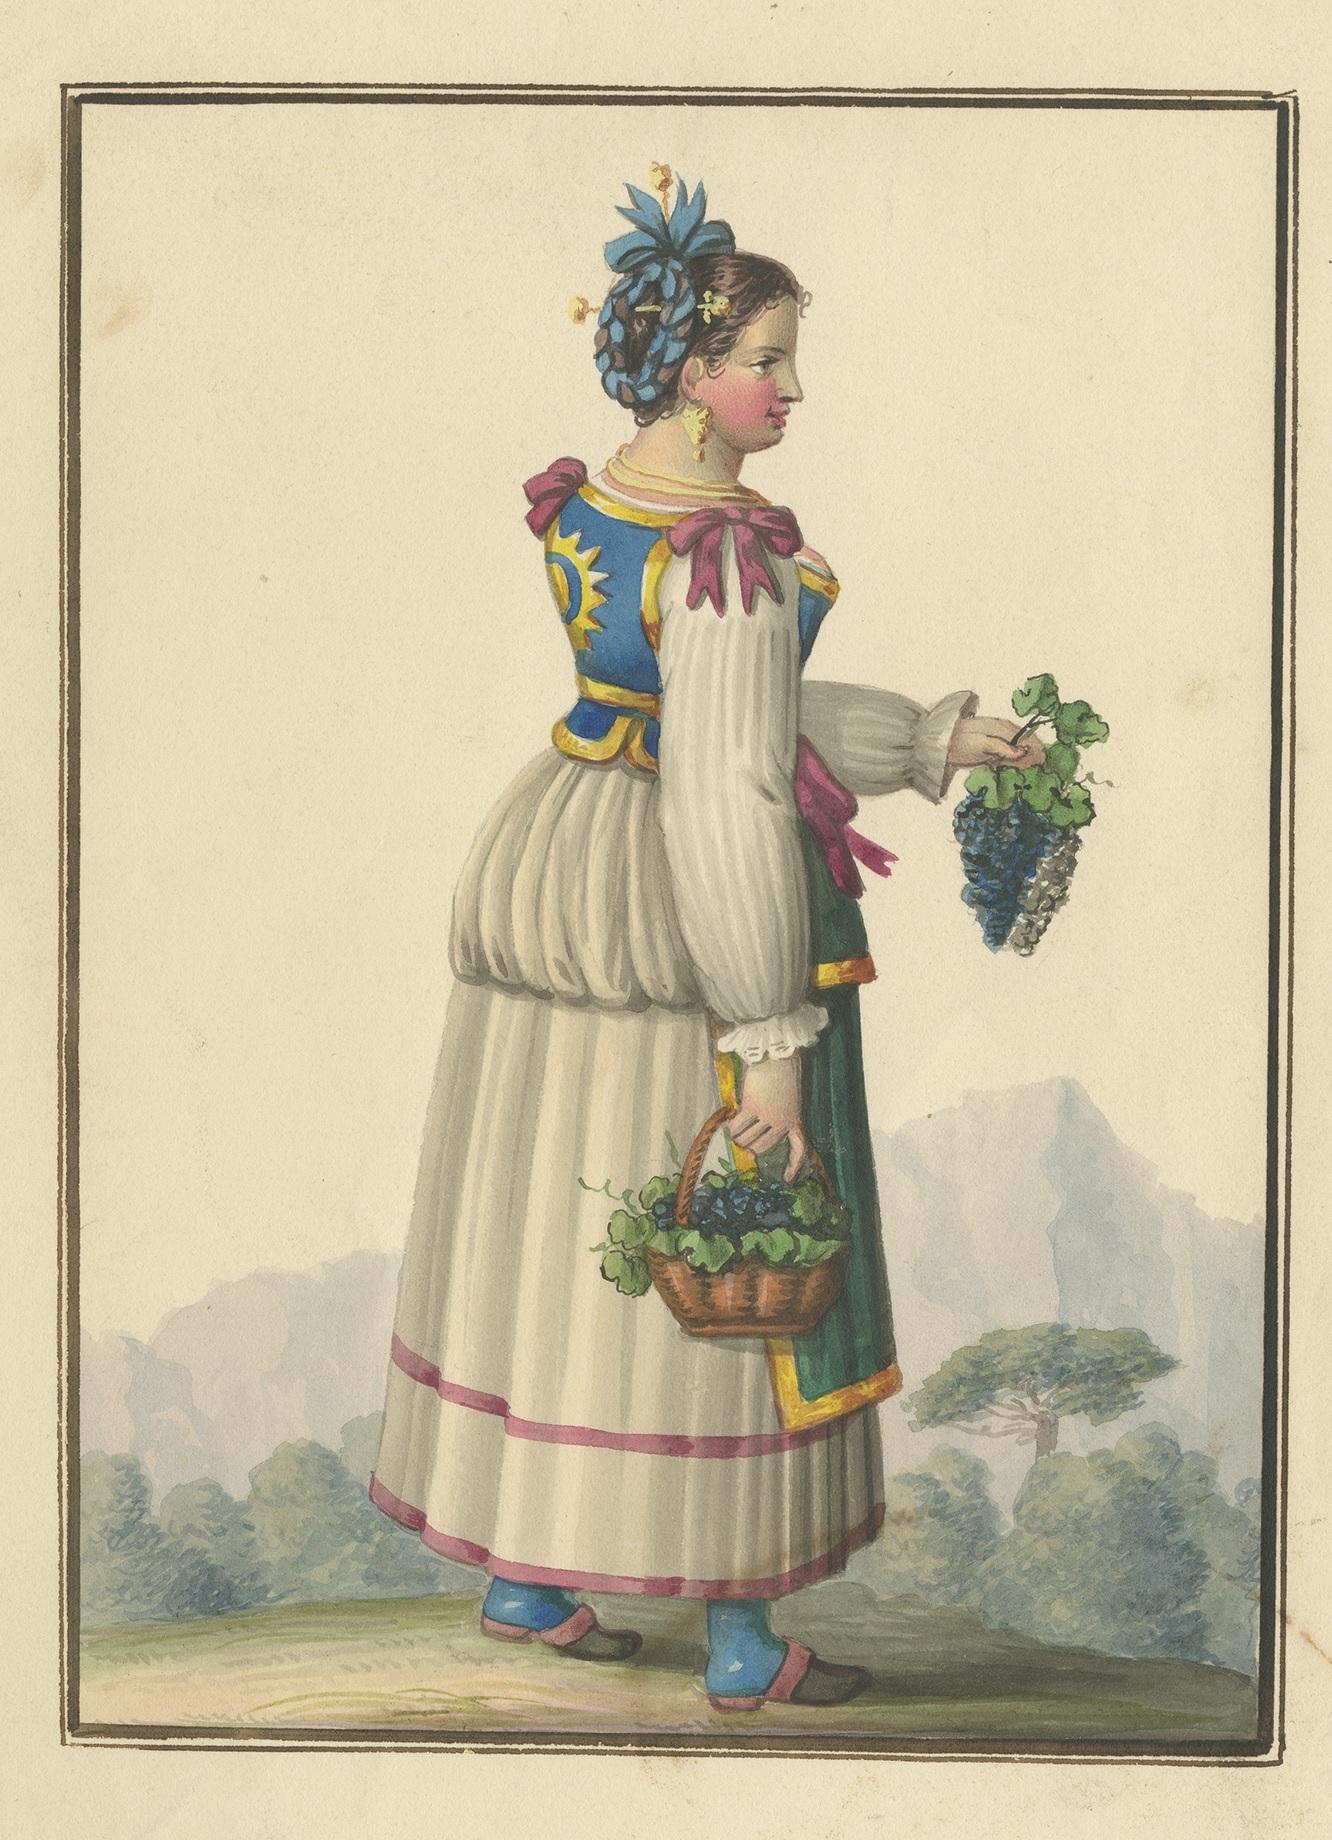 19th Century Antique Print of a Woman Harvesting Grapes 'circa 1880' For Sale